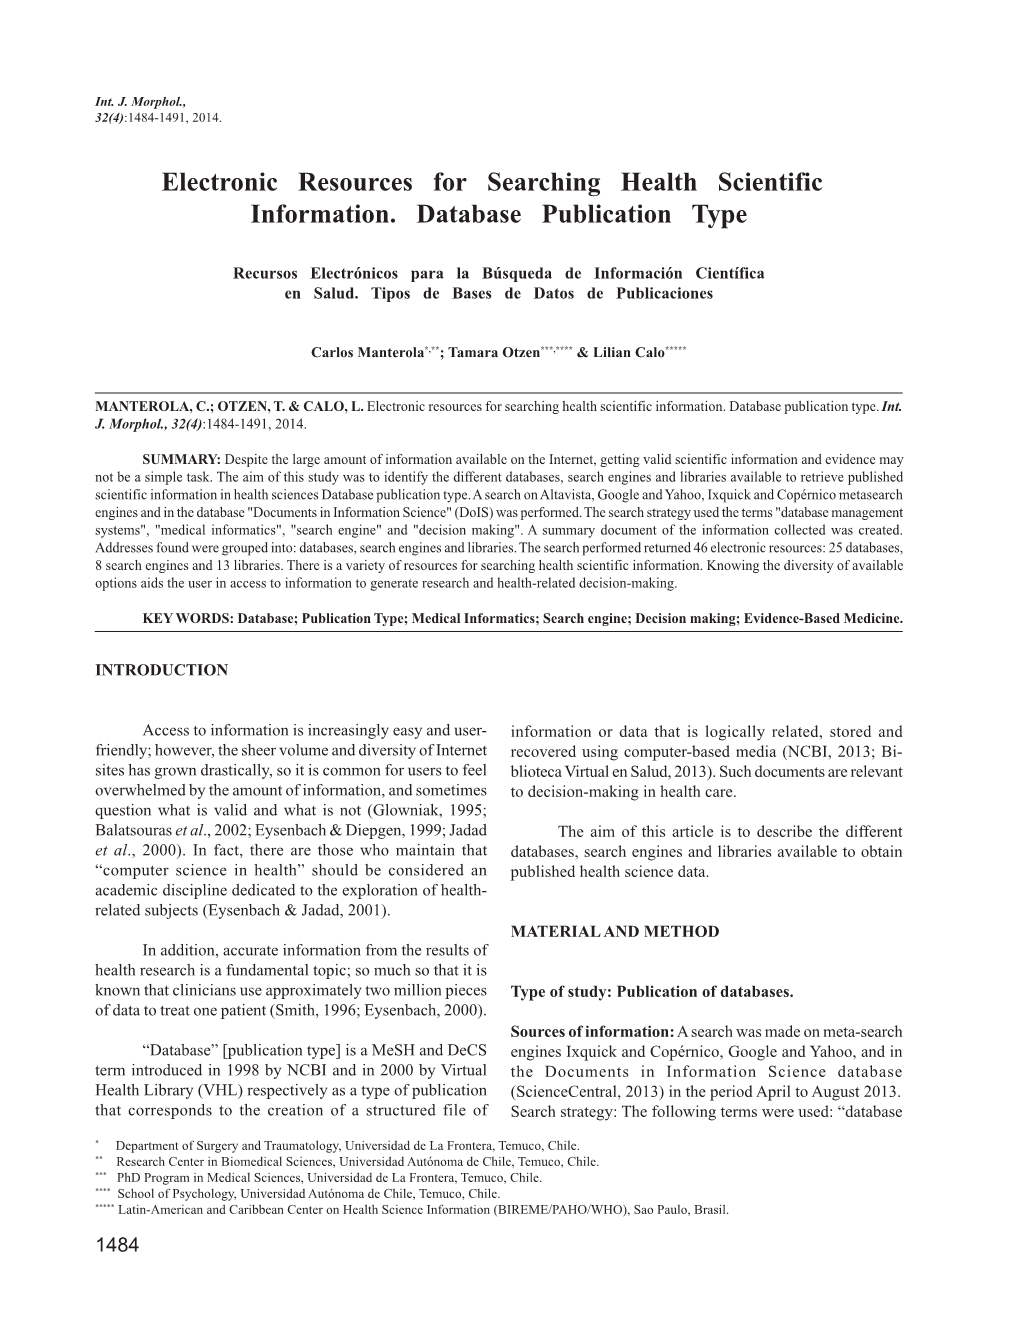 Electronic Resources for Searching Health Scientific Information